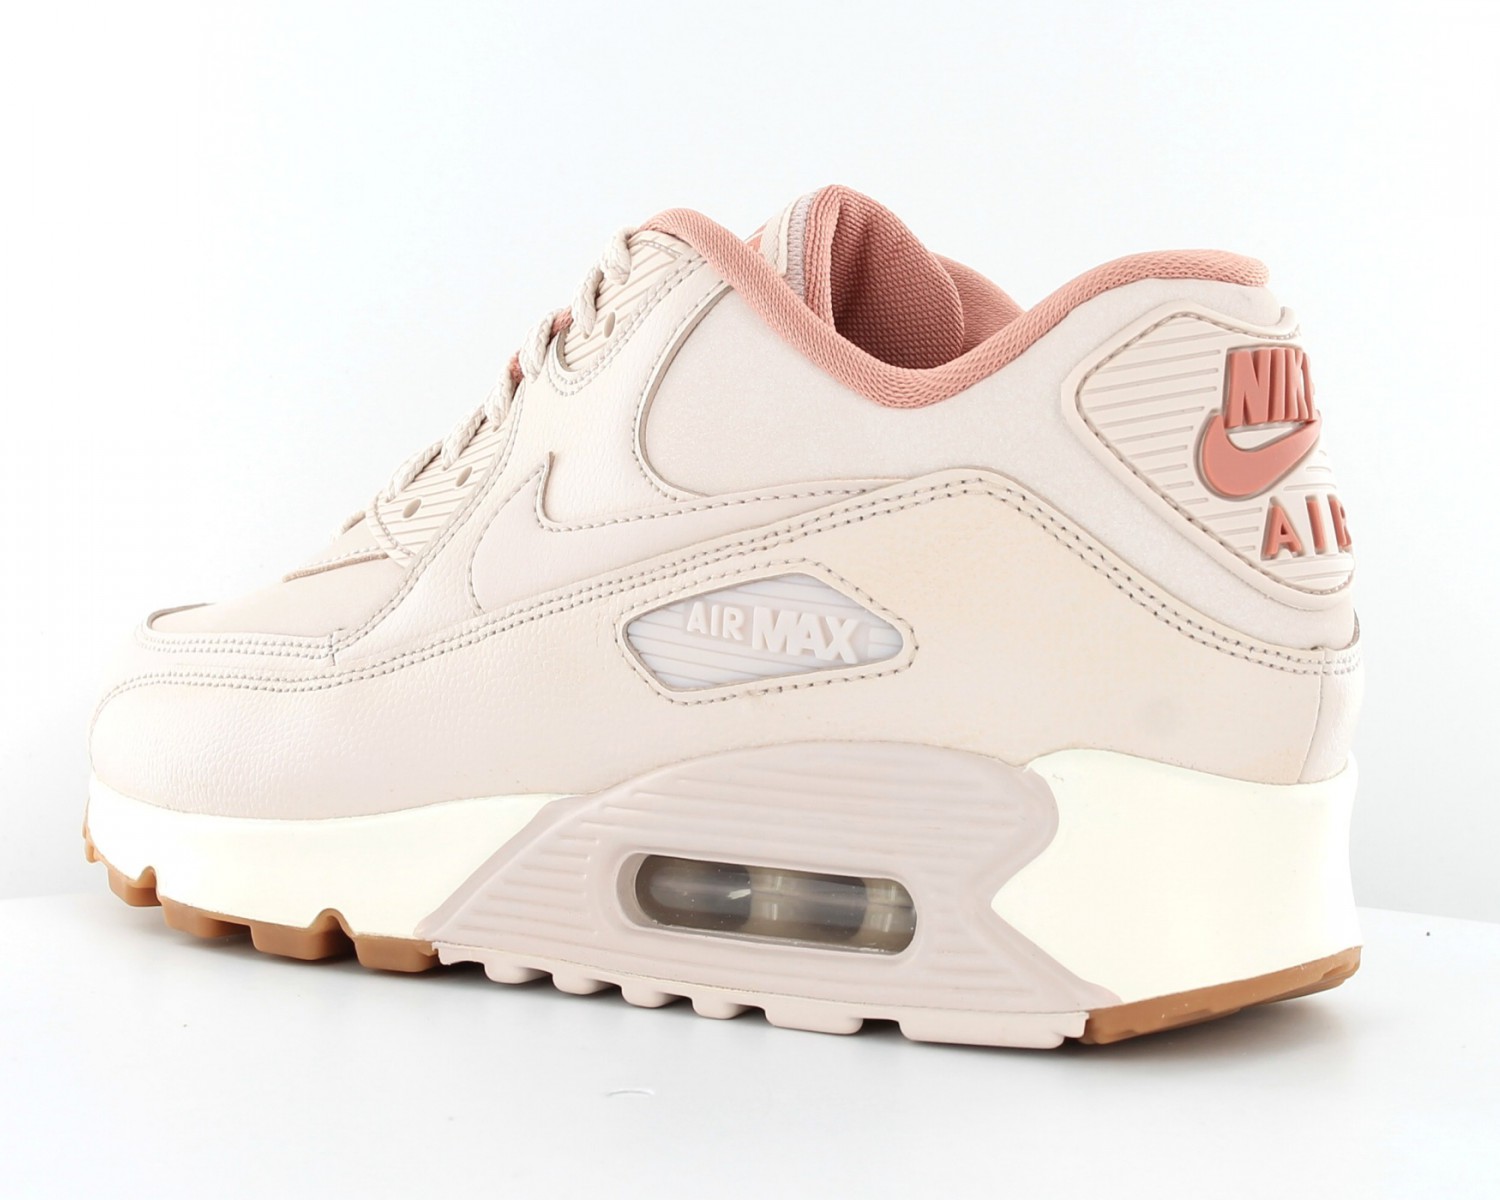 Nike Air Max 90 wmns leather Rose rose